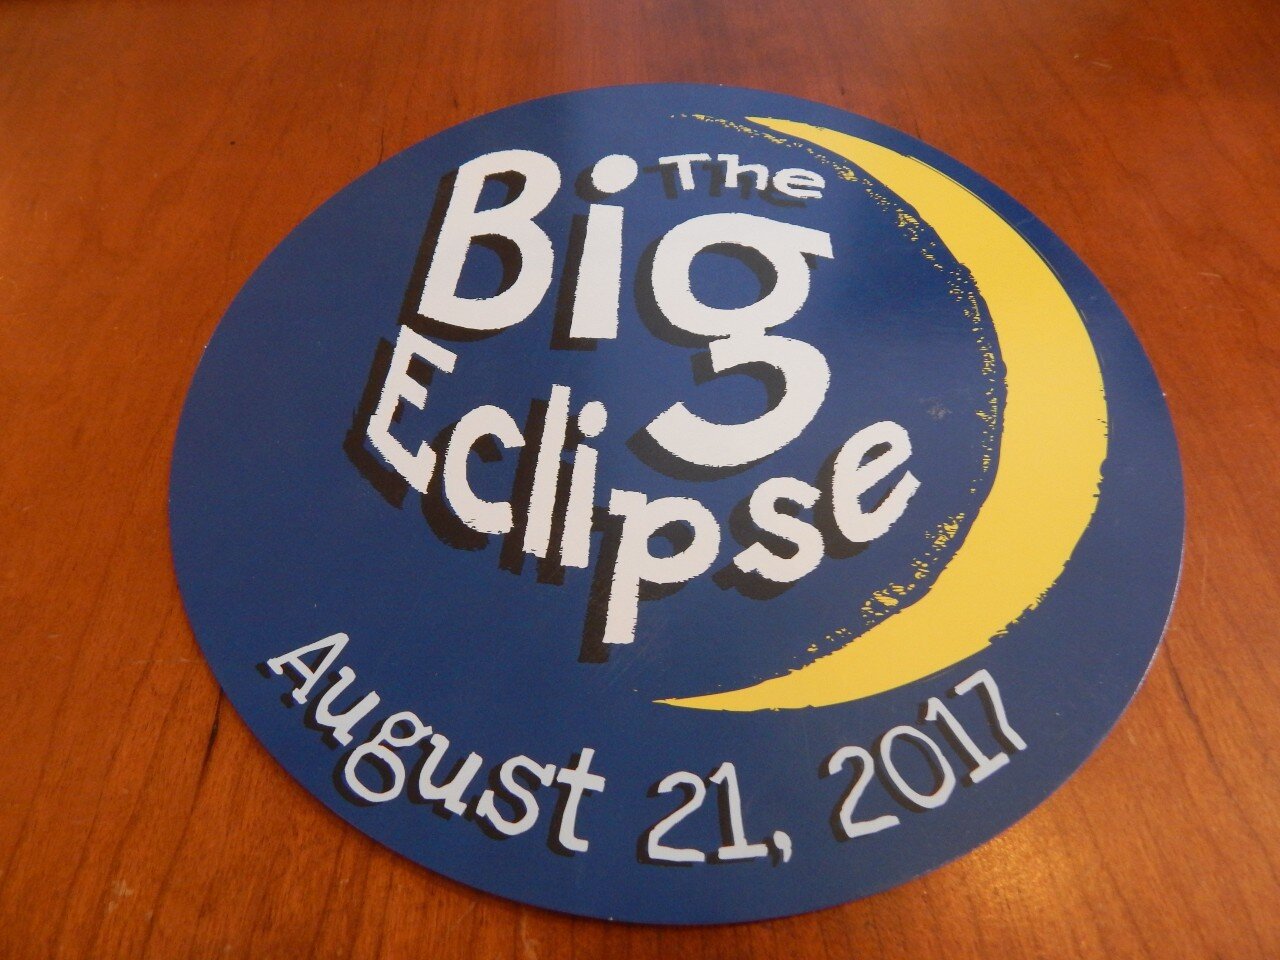  Eclipse poster at Thomas Condon Paleontology Center, photo by Dee Caputo 